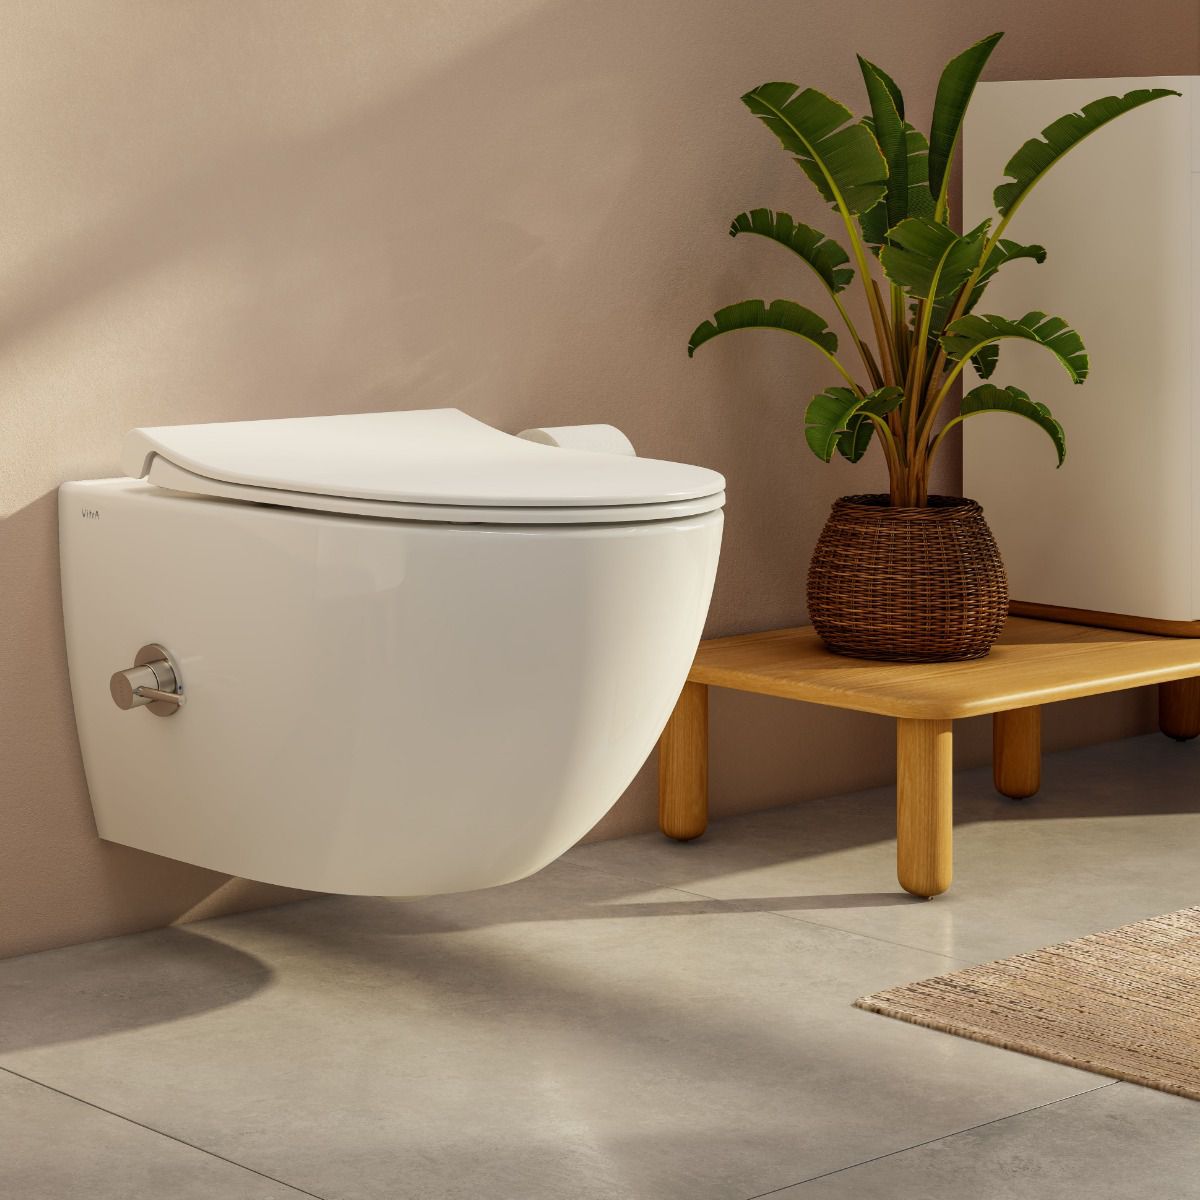 VitrA Aquacare Sento Rimless Wall Hung Wc with Integrated Thermostatic Stop Valve & Bidet Function - White 8